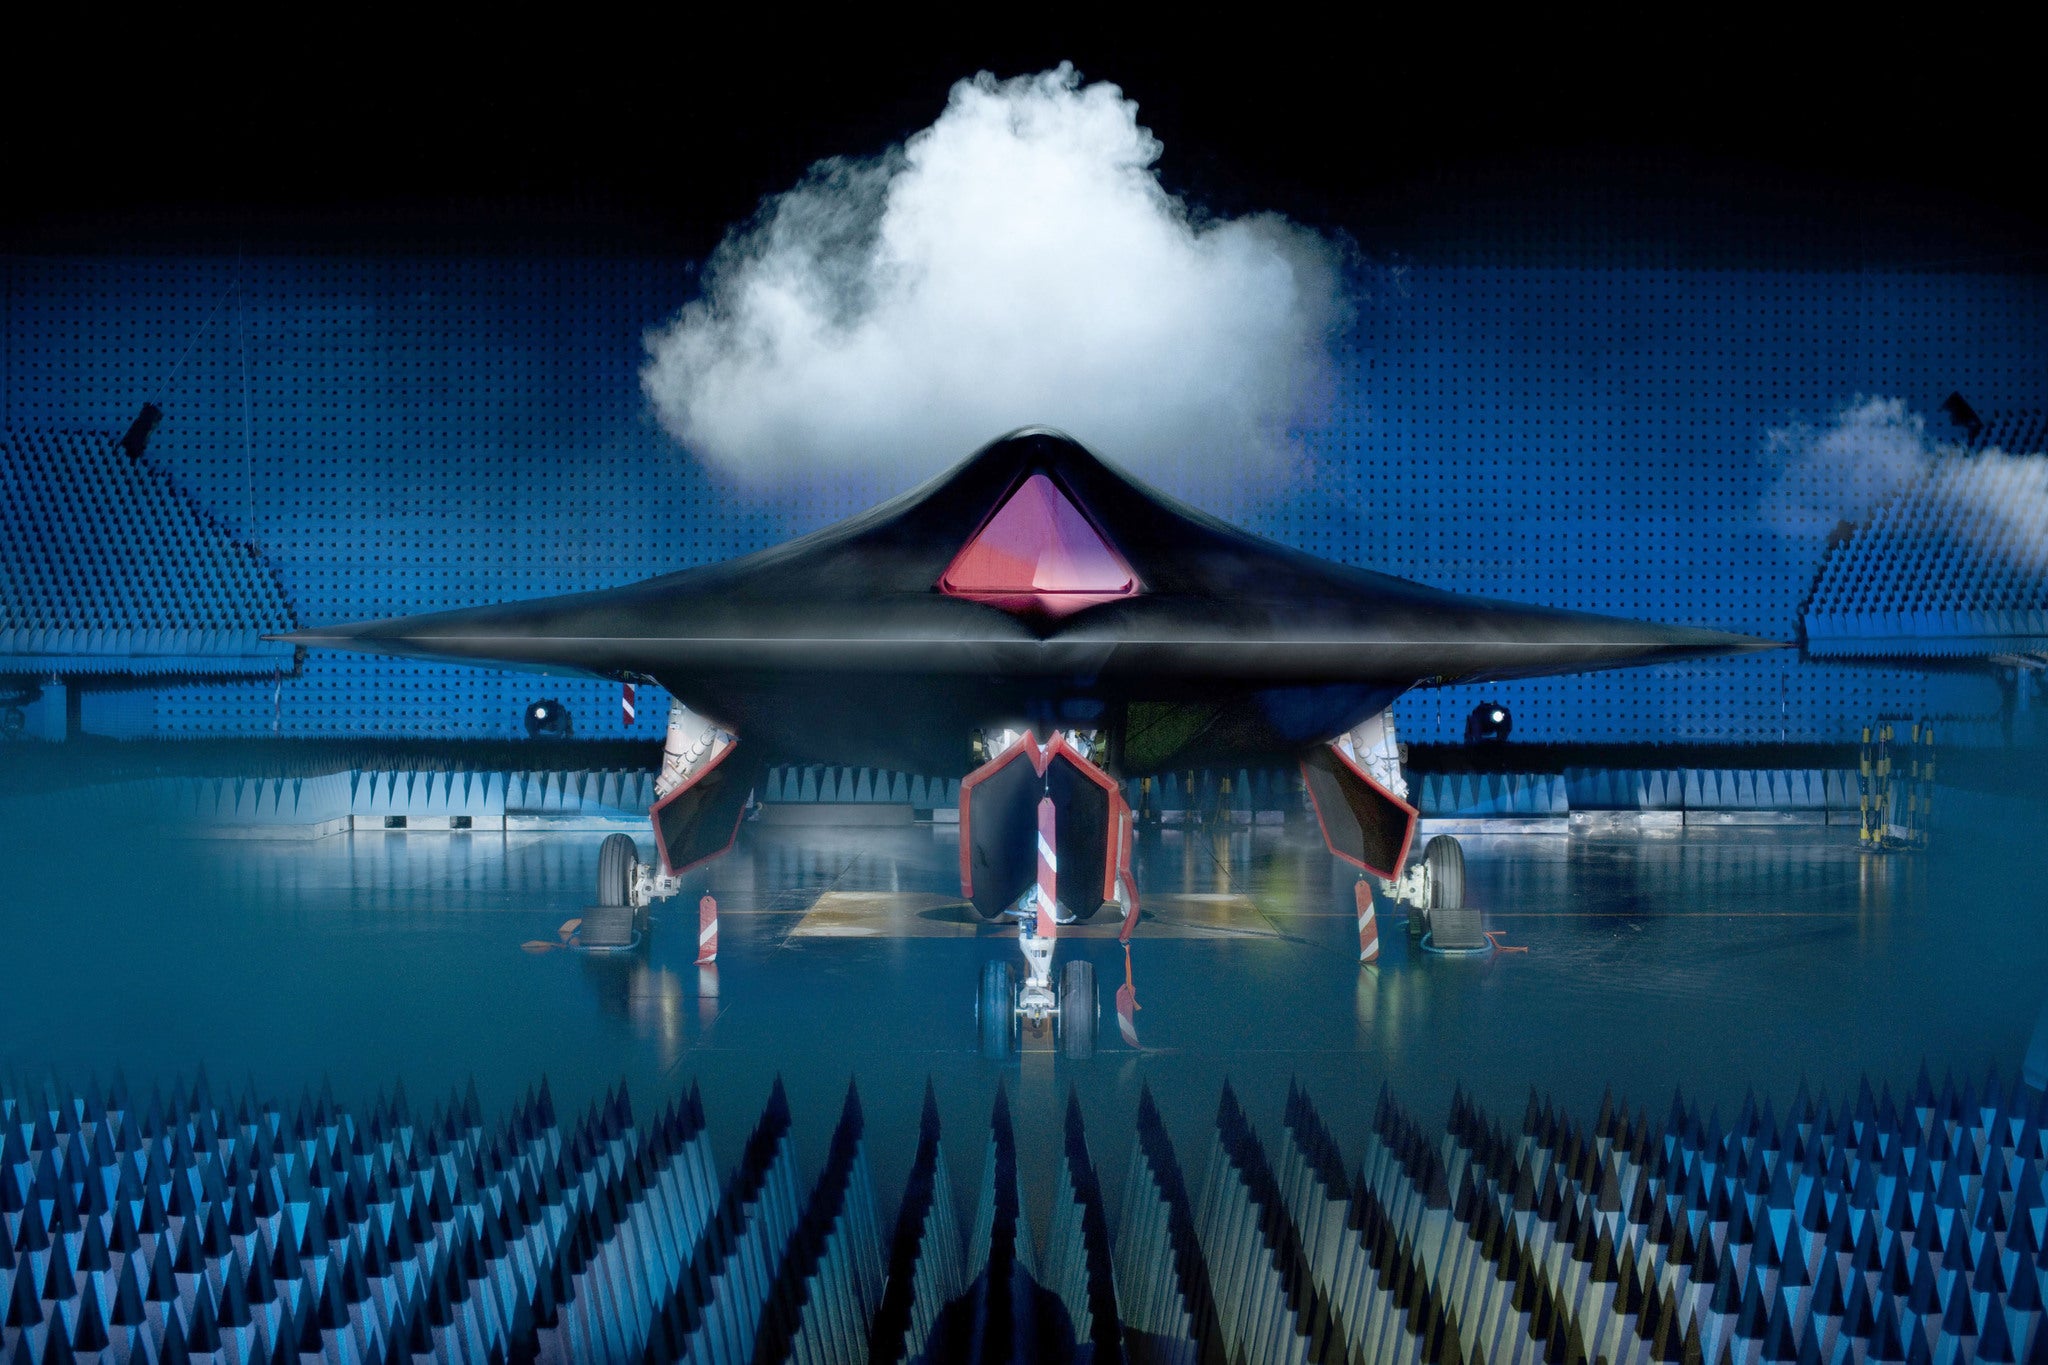 A prototype unmanned combat aircraft, called Taranis is unveiled by the Ministry of Defence (MoD). It will test the possibility of developing an autonomous stealthy Unmanned Combat Air Vehicle (UCAV) that could strike targets at long range, and be under t